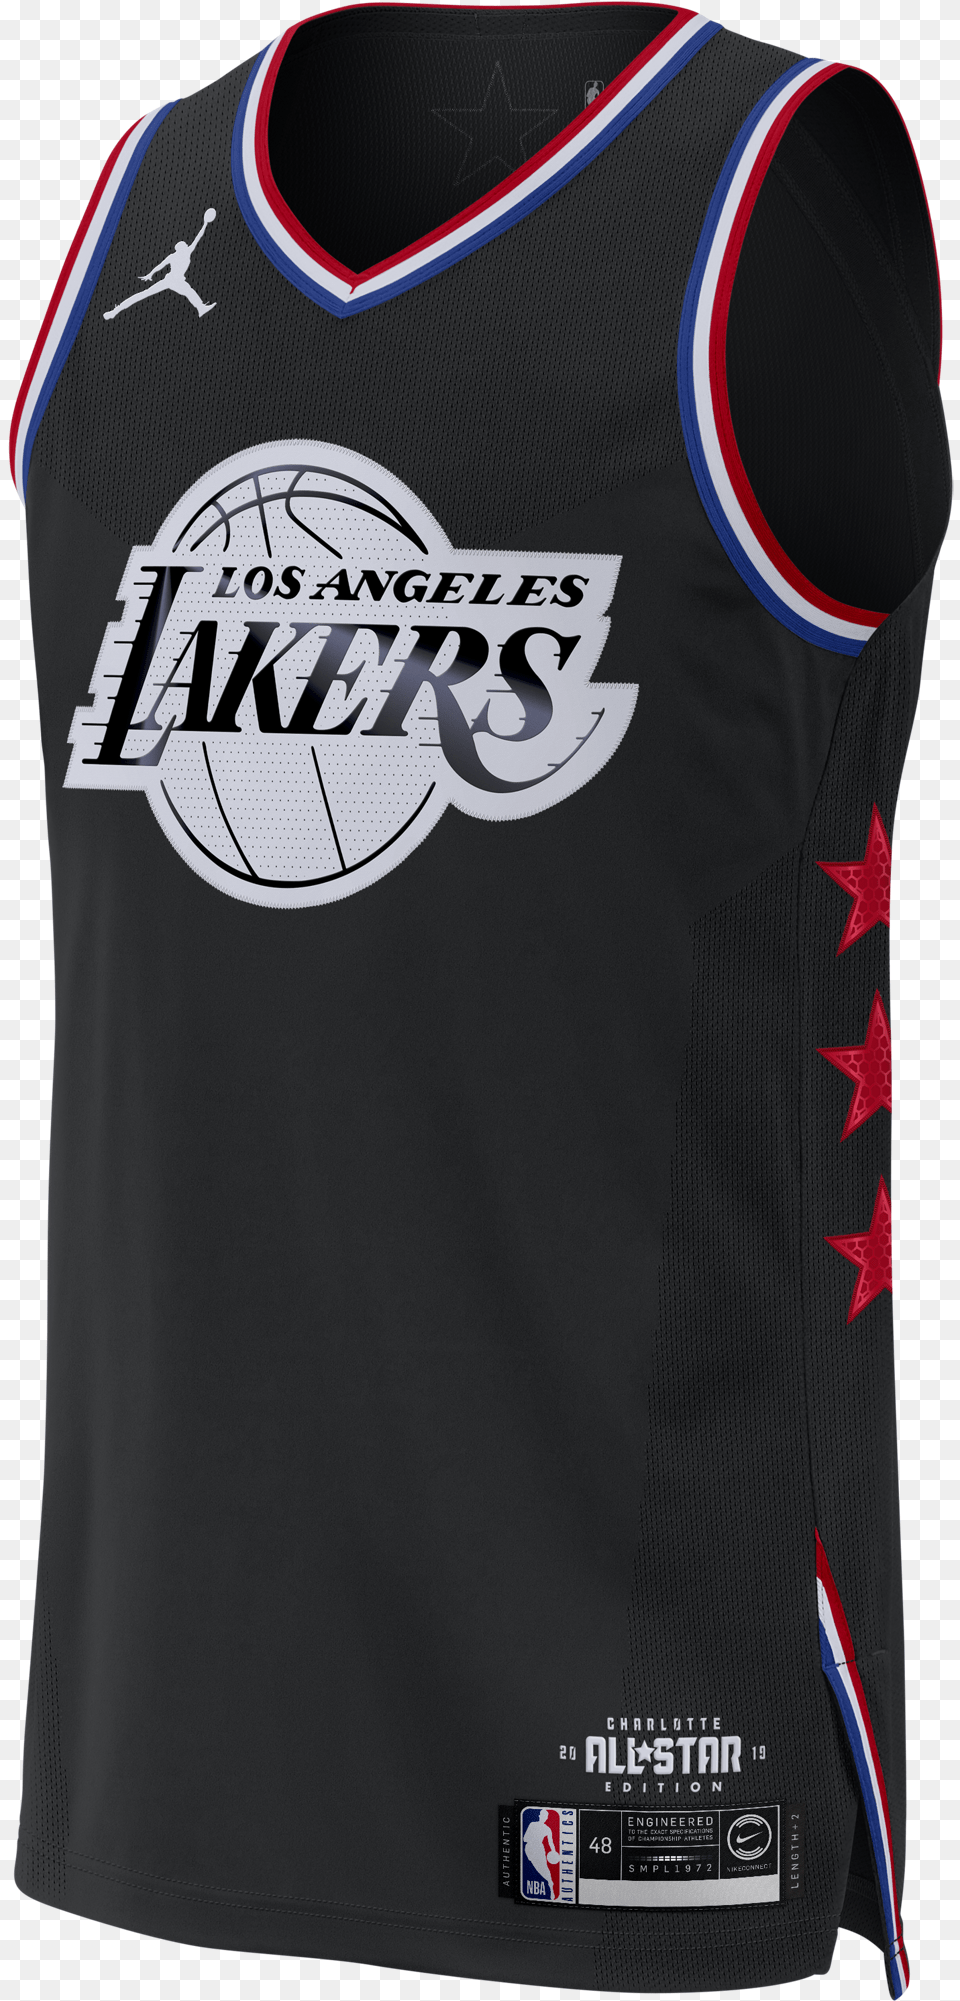 Air Jordan Nba All Star Weekend 2019 Lebron James Authentic 2019 All Star Game Jerseys, Clothing, Shirt, Person Png